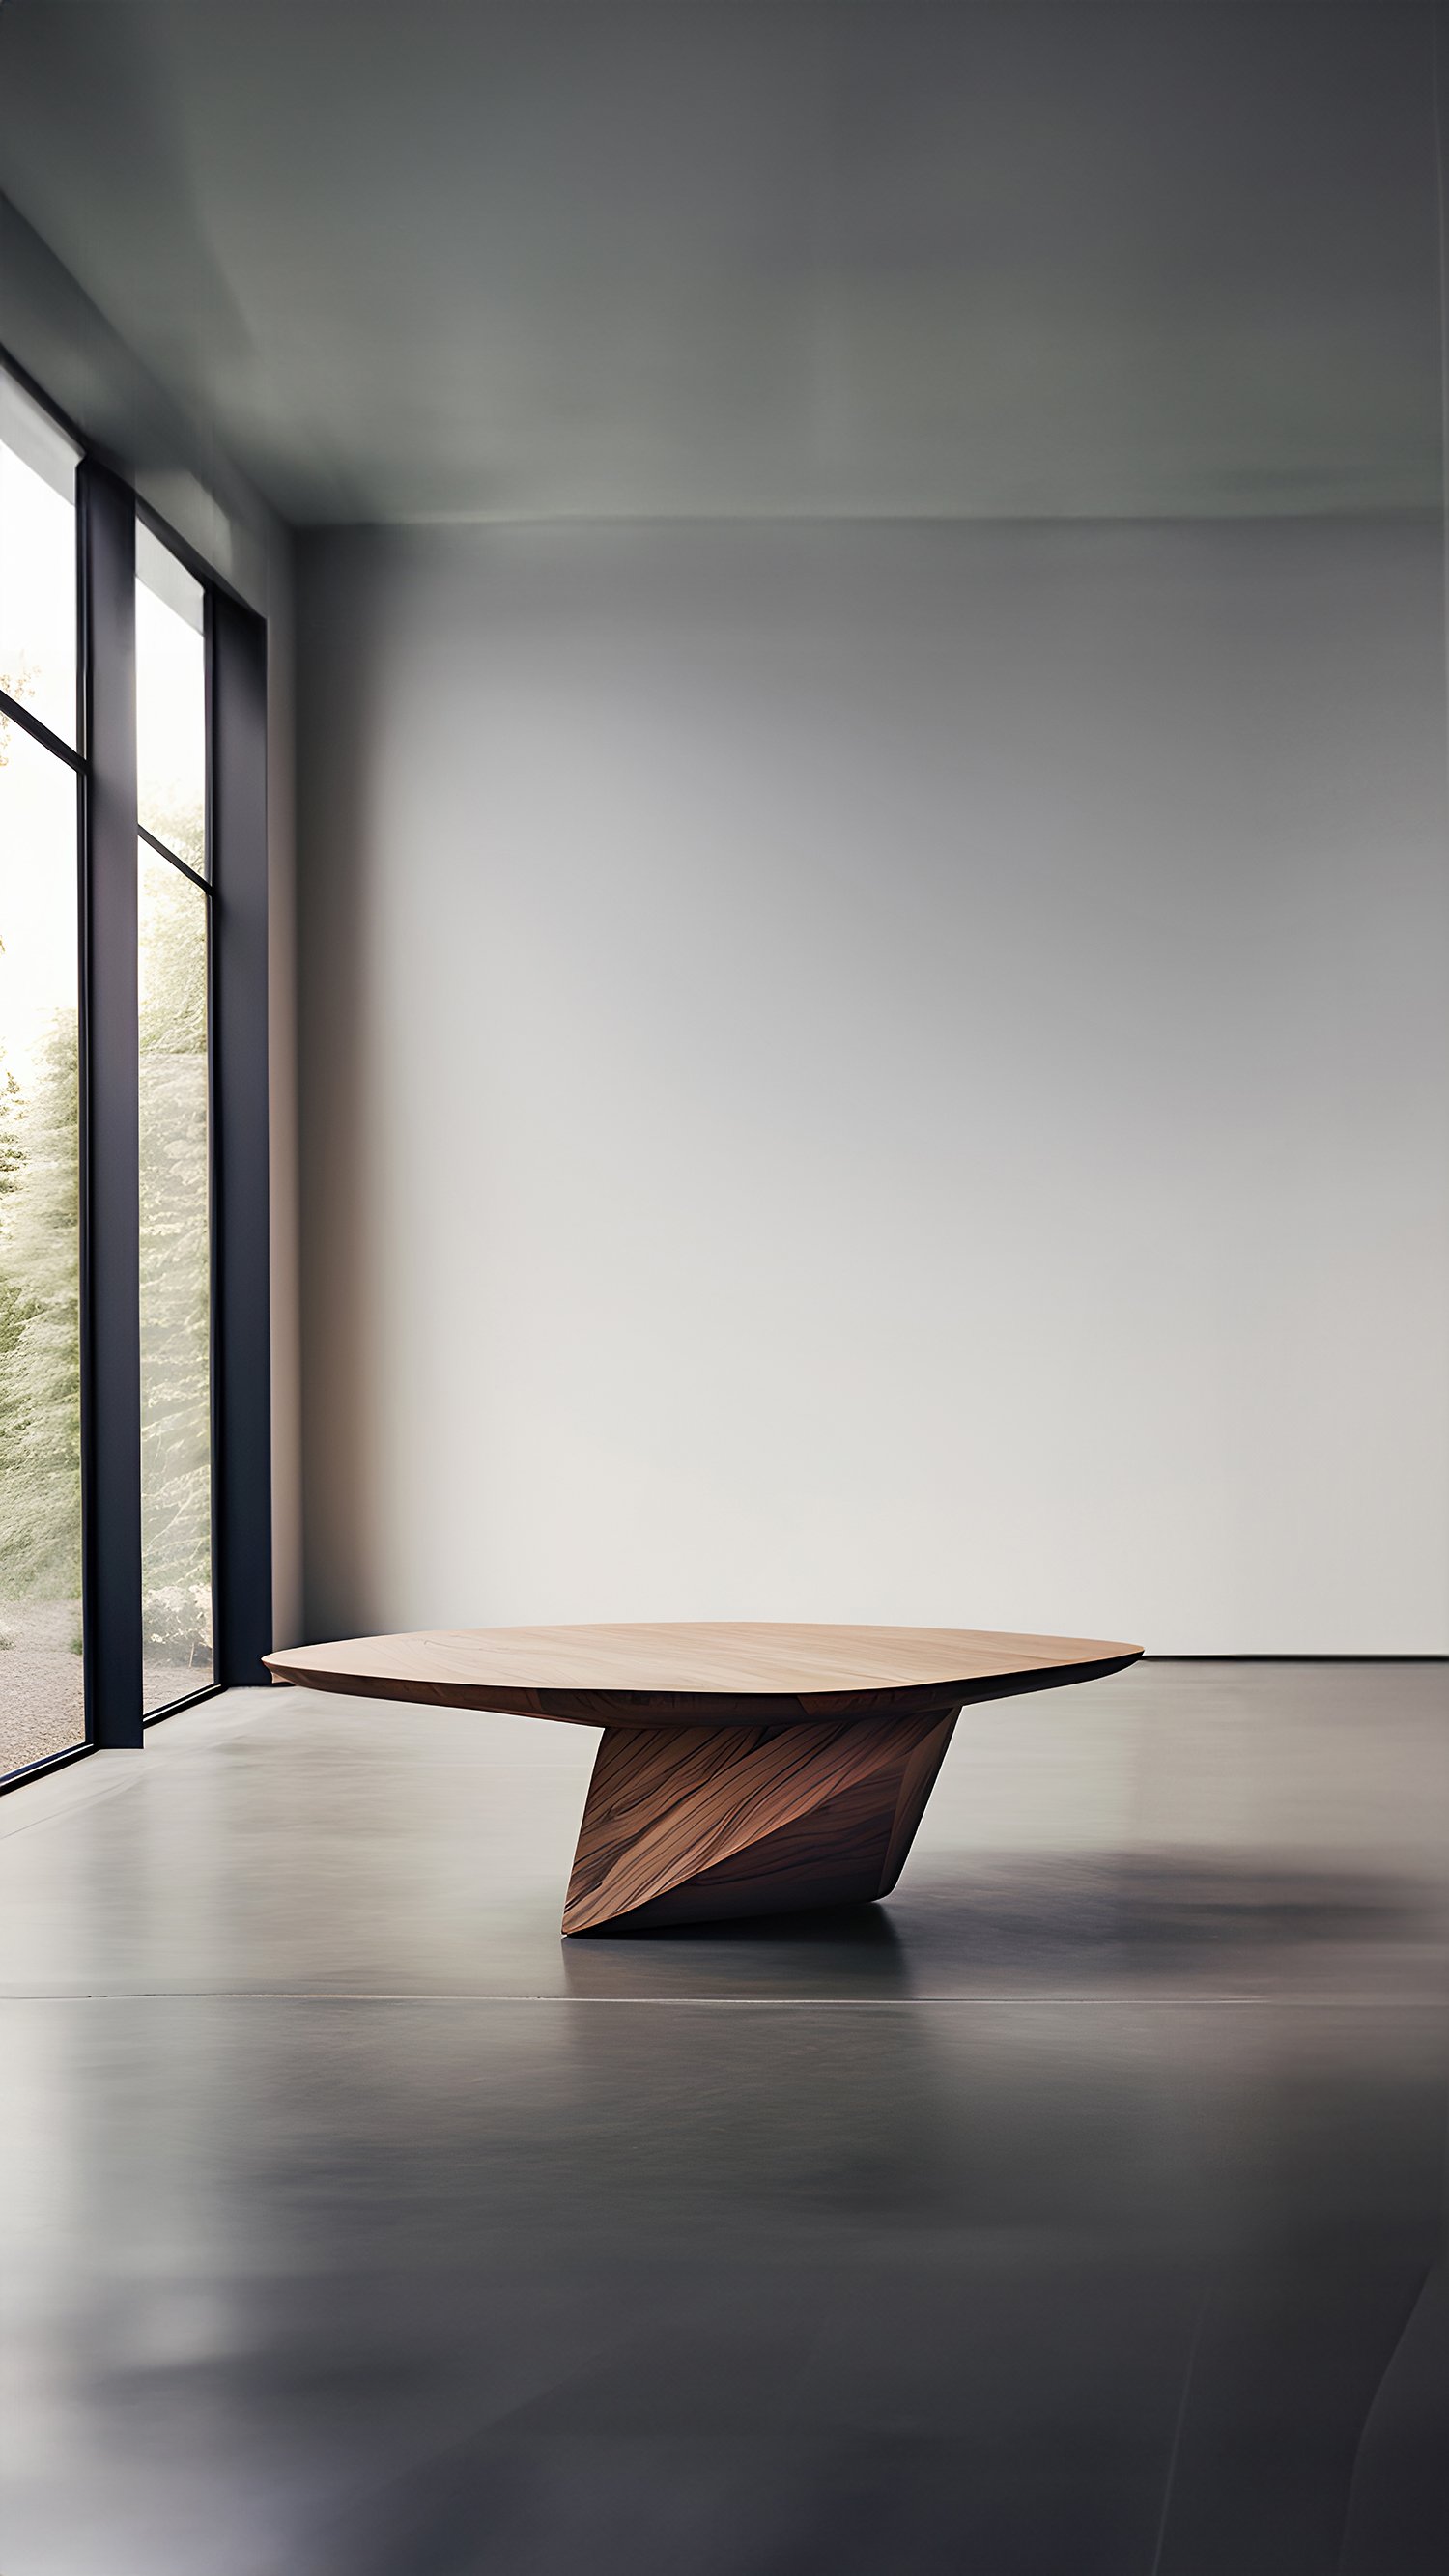 Sculptural Coffee Table Made of Solid Wood, Center Table Solace S31 by Joel Escalona — 8.jpg